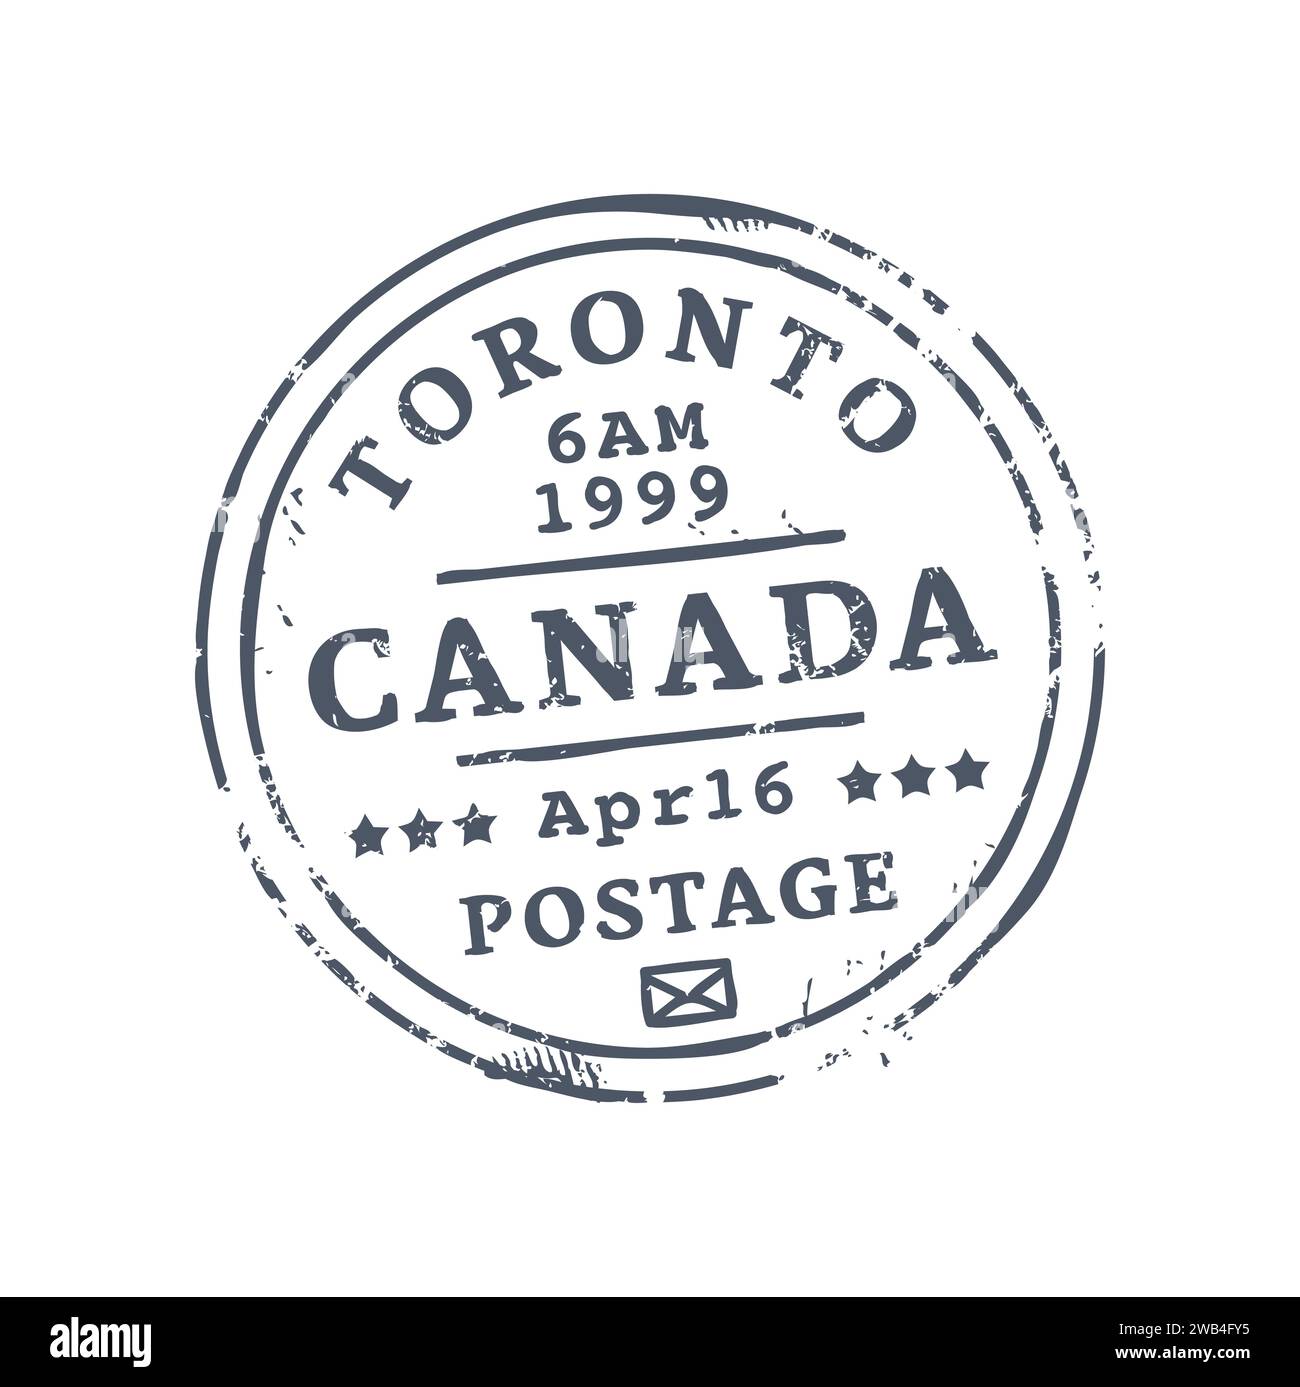 Canada Toronto postage and postal rubber stamp. Vector post office round seal with envelope, mail delivery emblem. International mail control sign Stock Vector